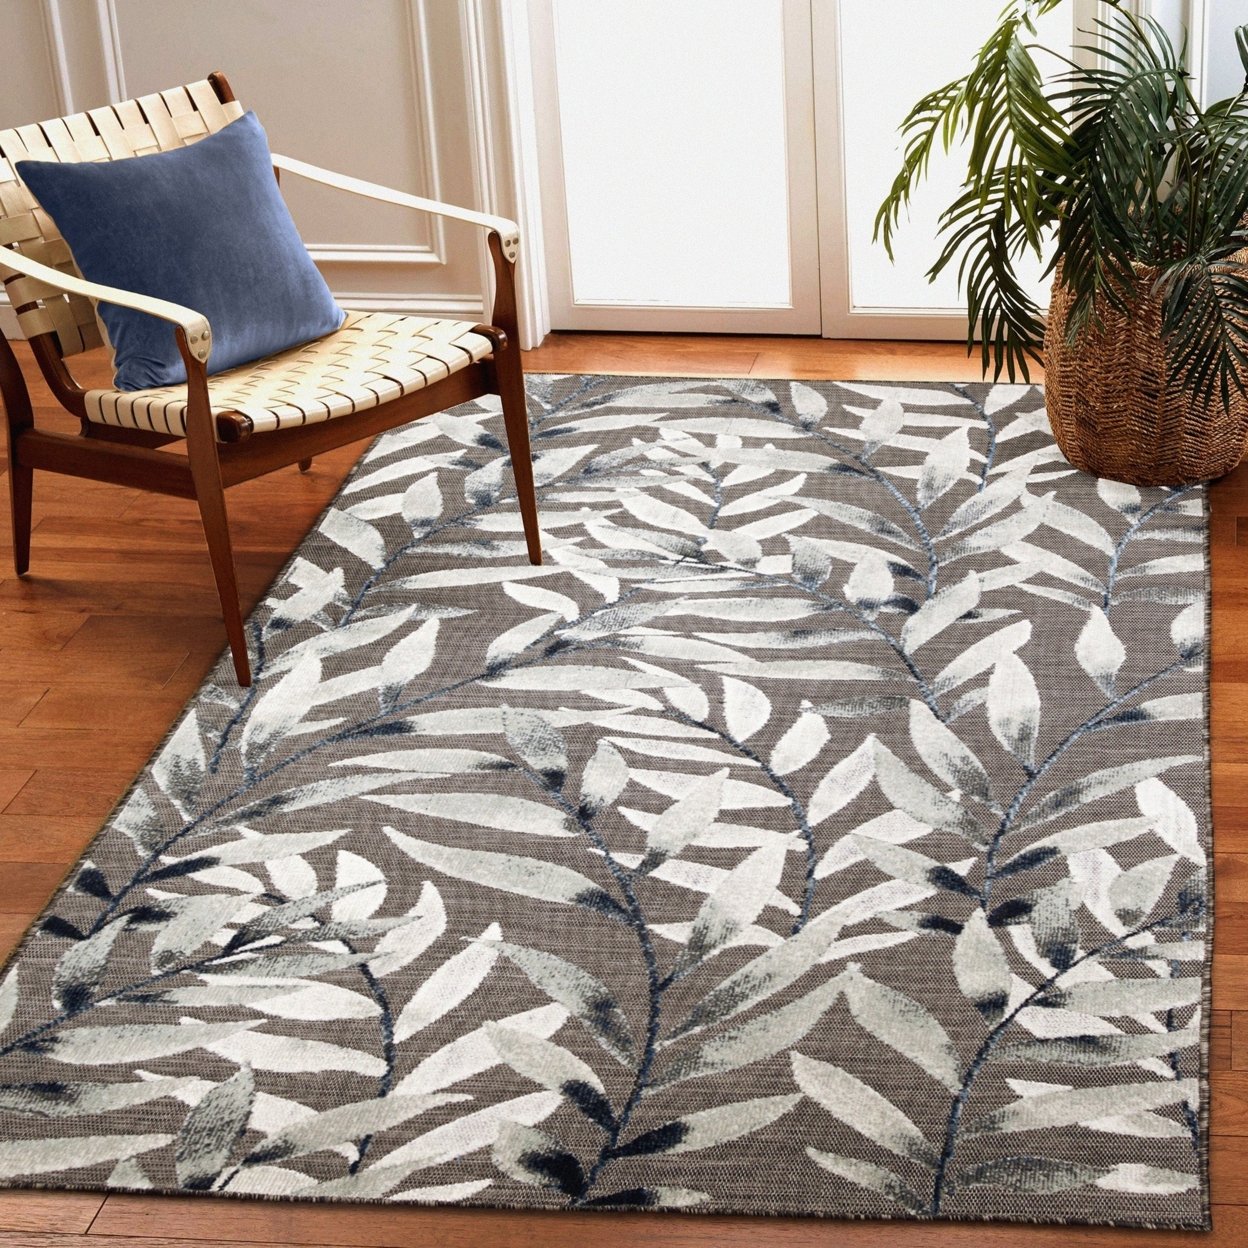 Liora Manne Canyon Vines Indoor Outdoor Area Rug Charcoal - 7'8 Round